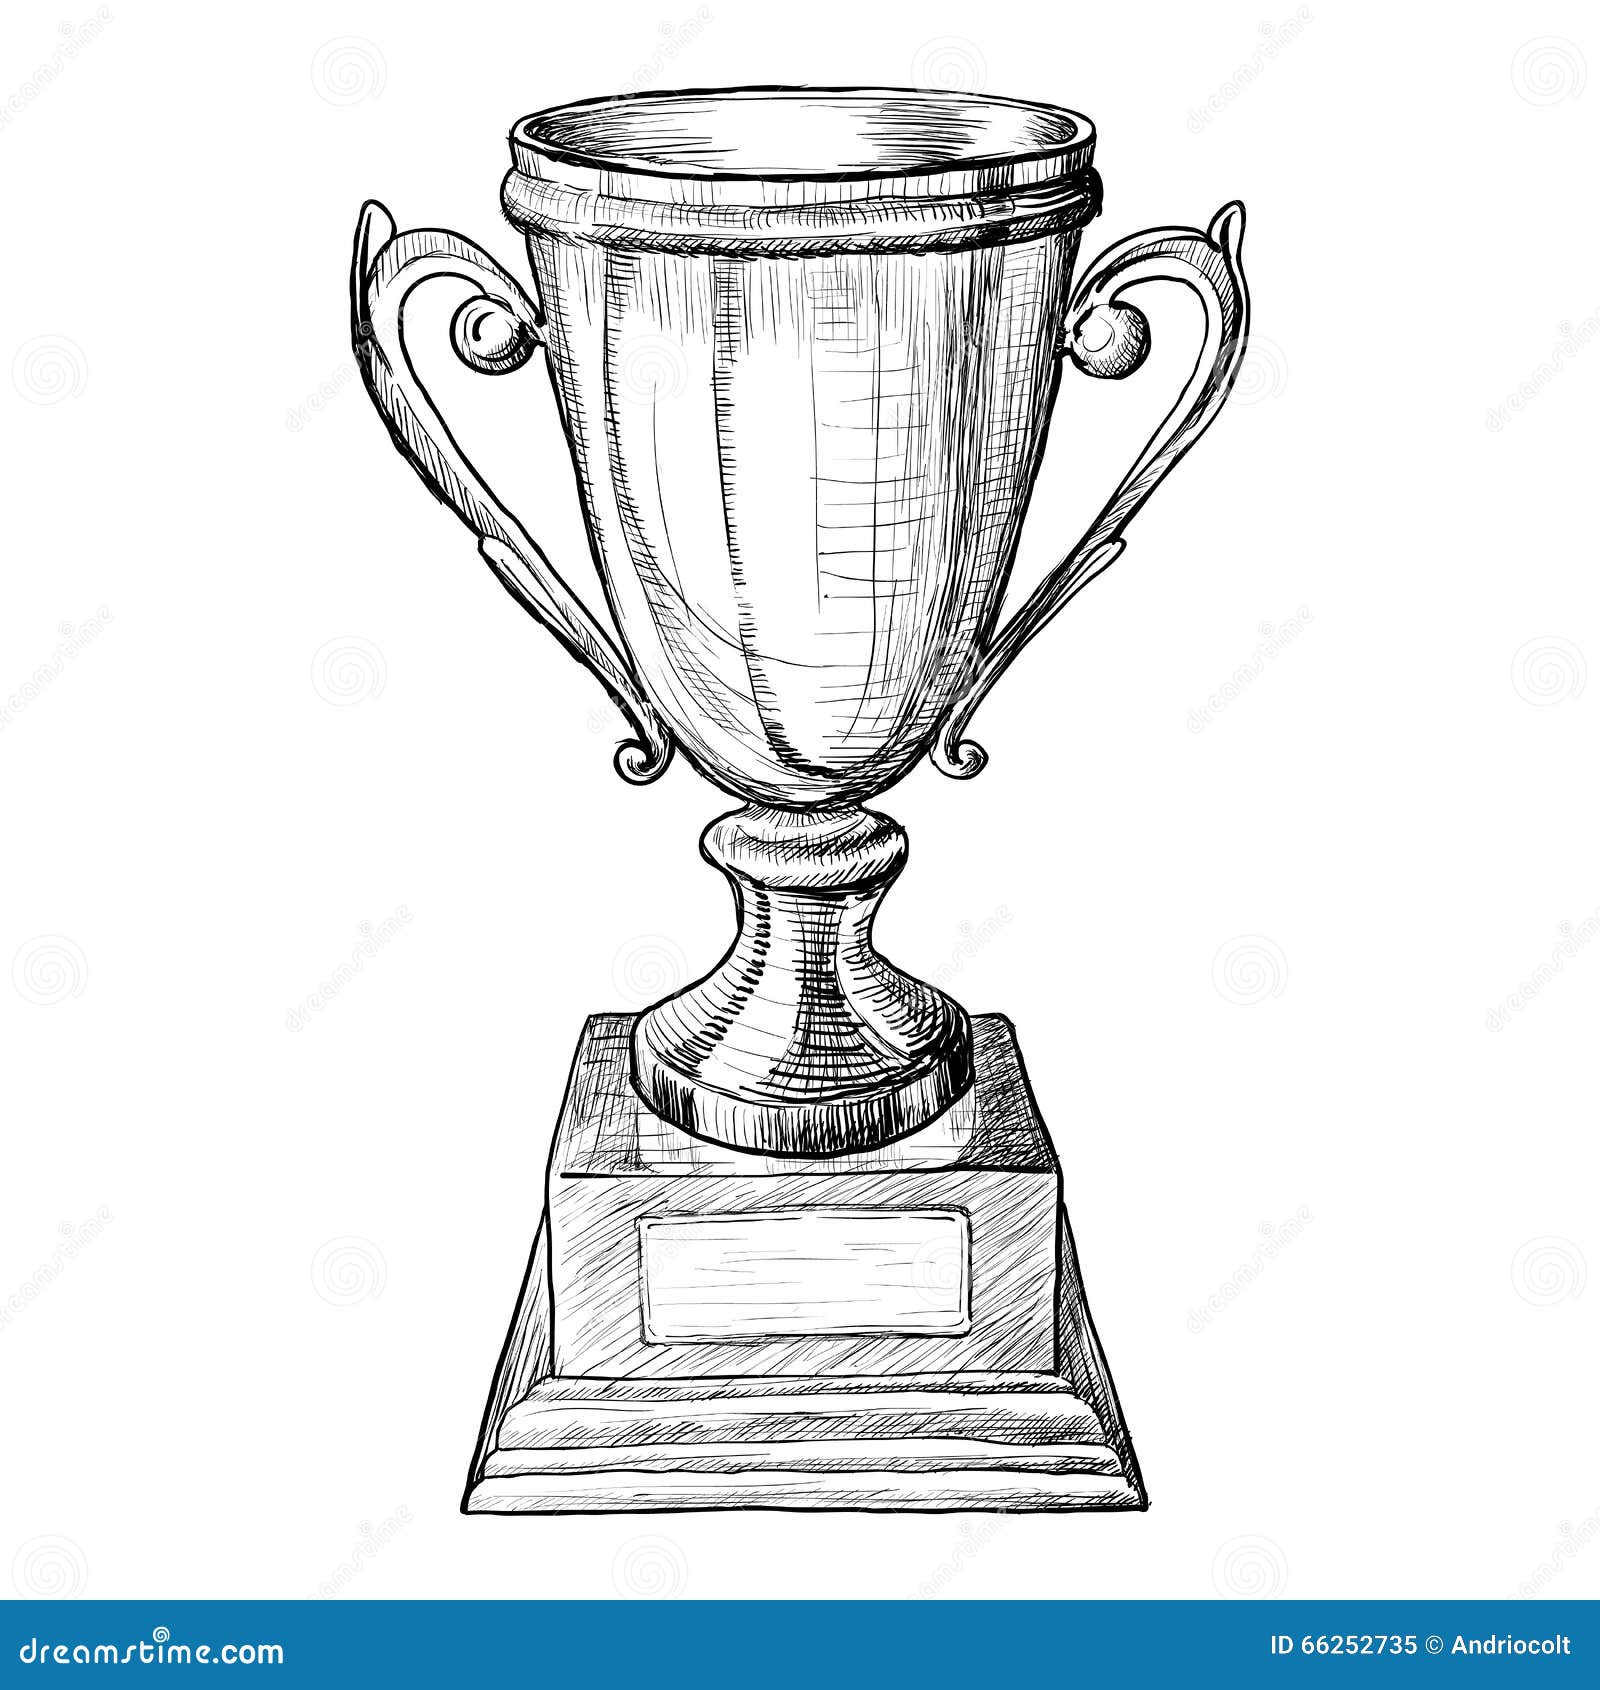 14200 Trophy Drawing Stock Photos Pictures  RoyaltyFree Images   iStock  Thought bubble Chalk board